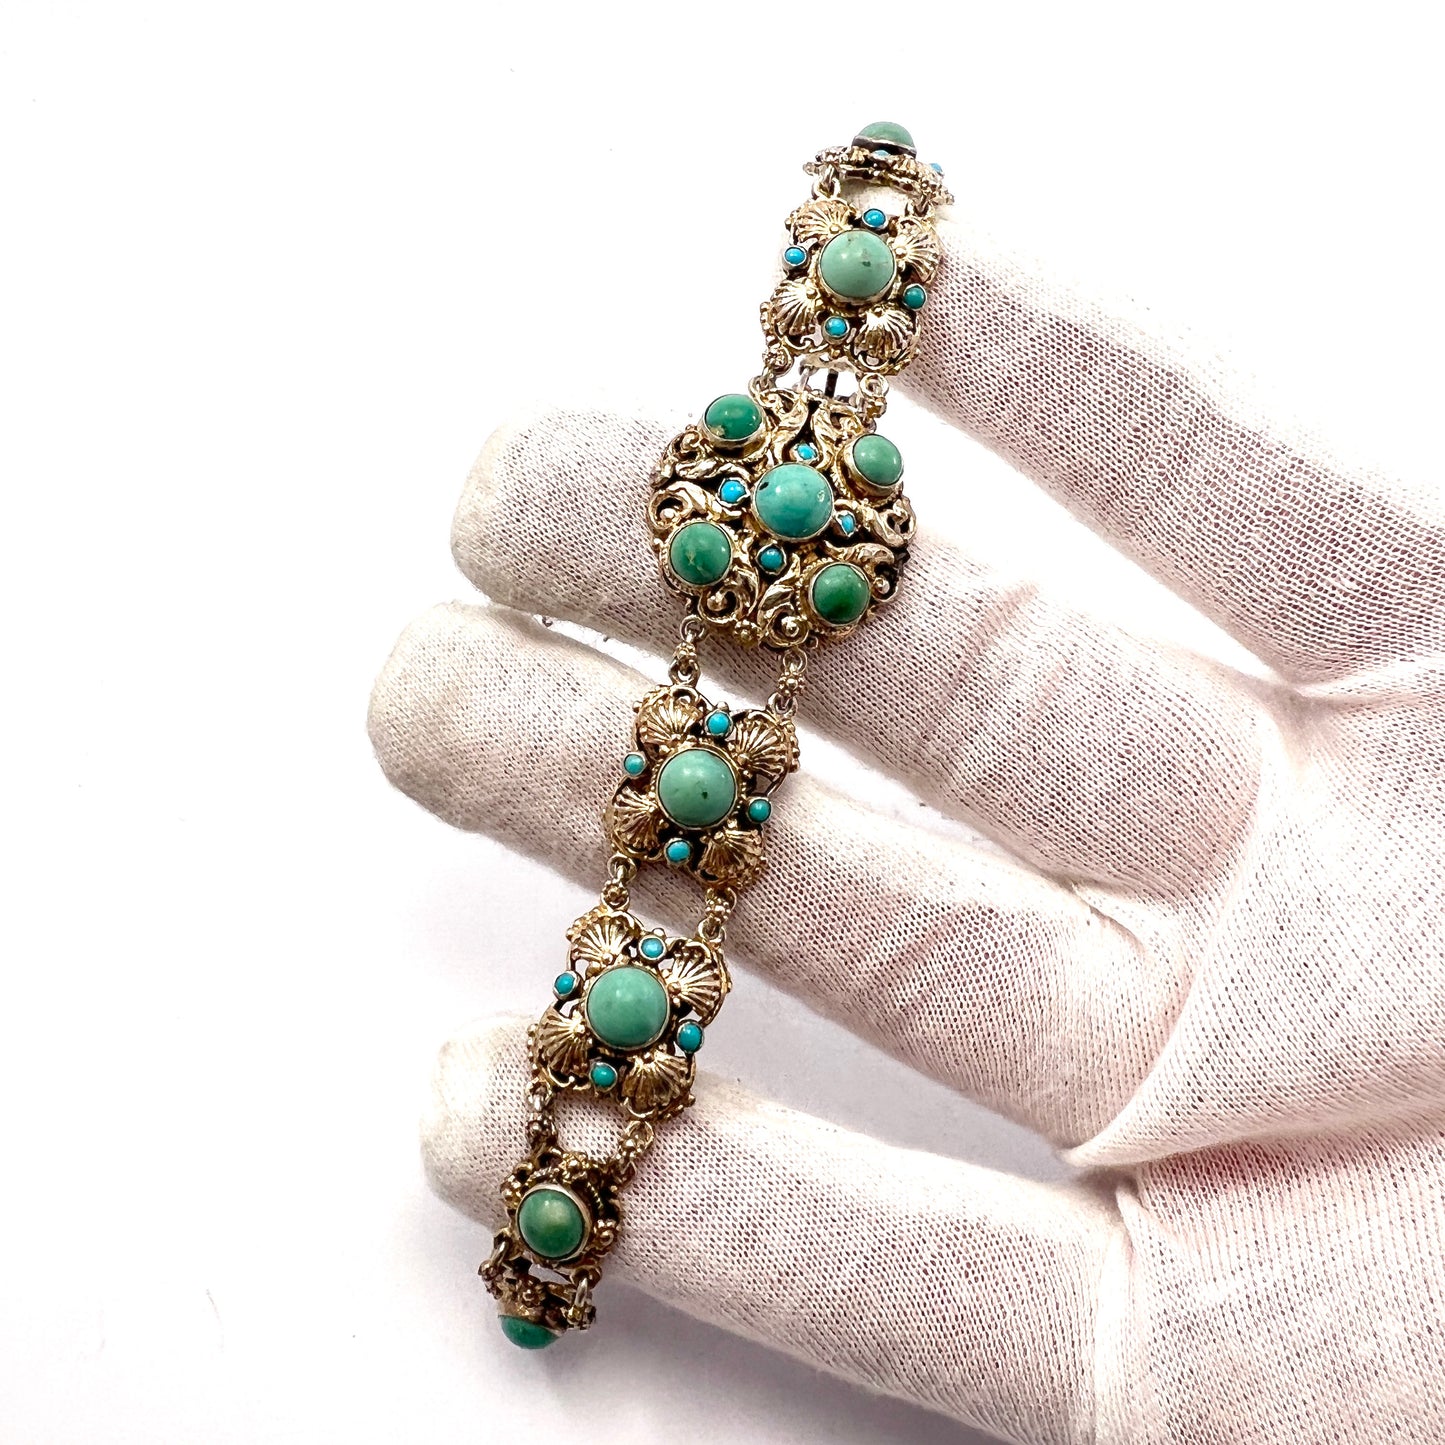 Czechoslovakia, Antique early 1900s Arts and Crafts Solid Gilt Silver Turquoise Bracelet.